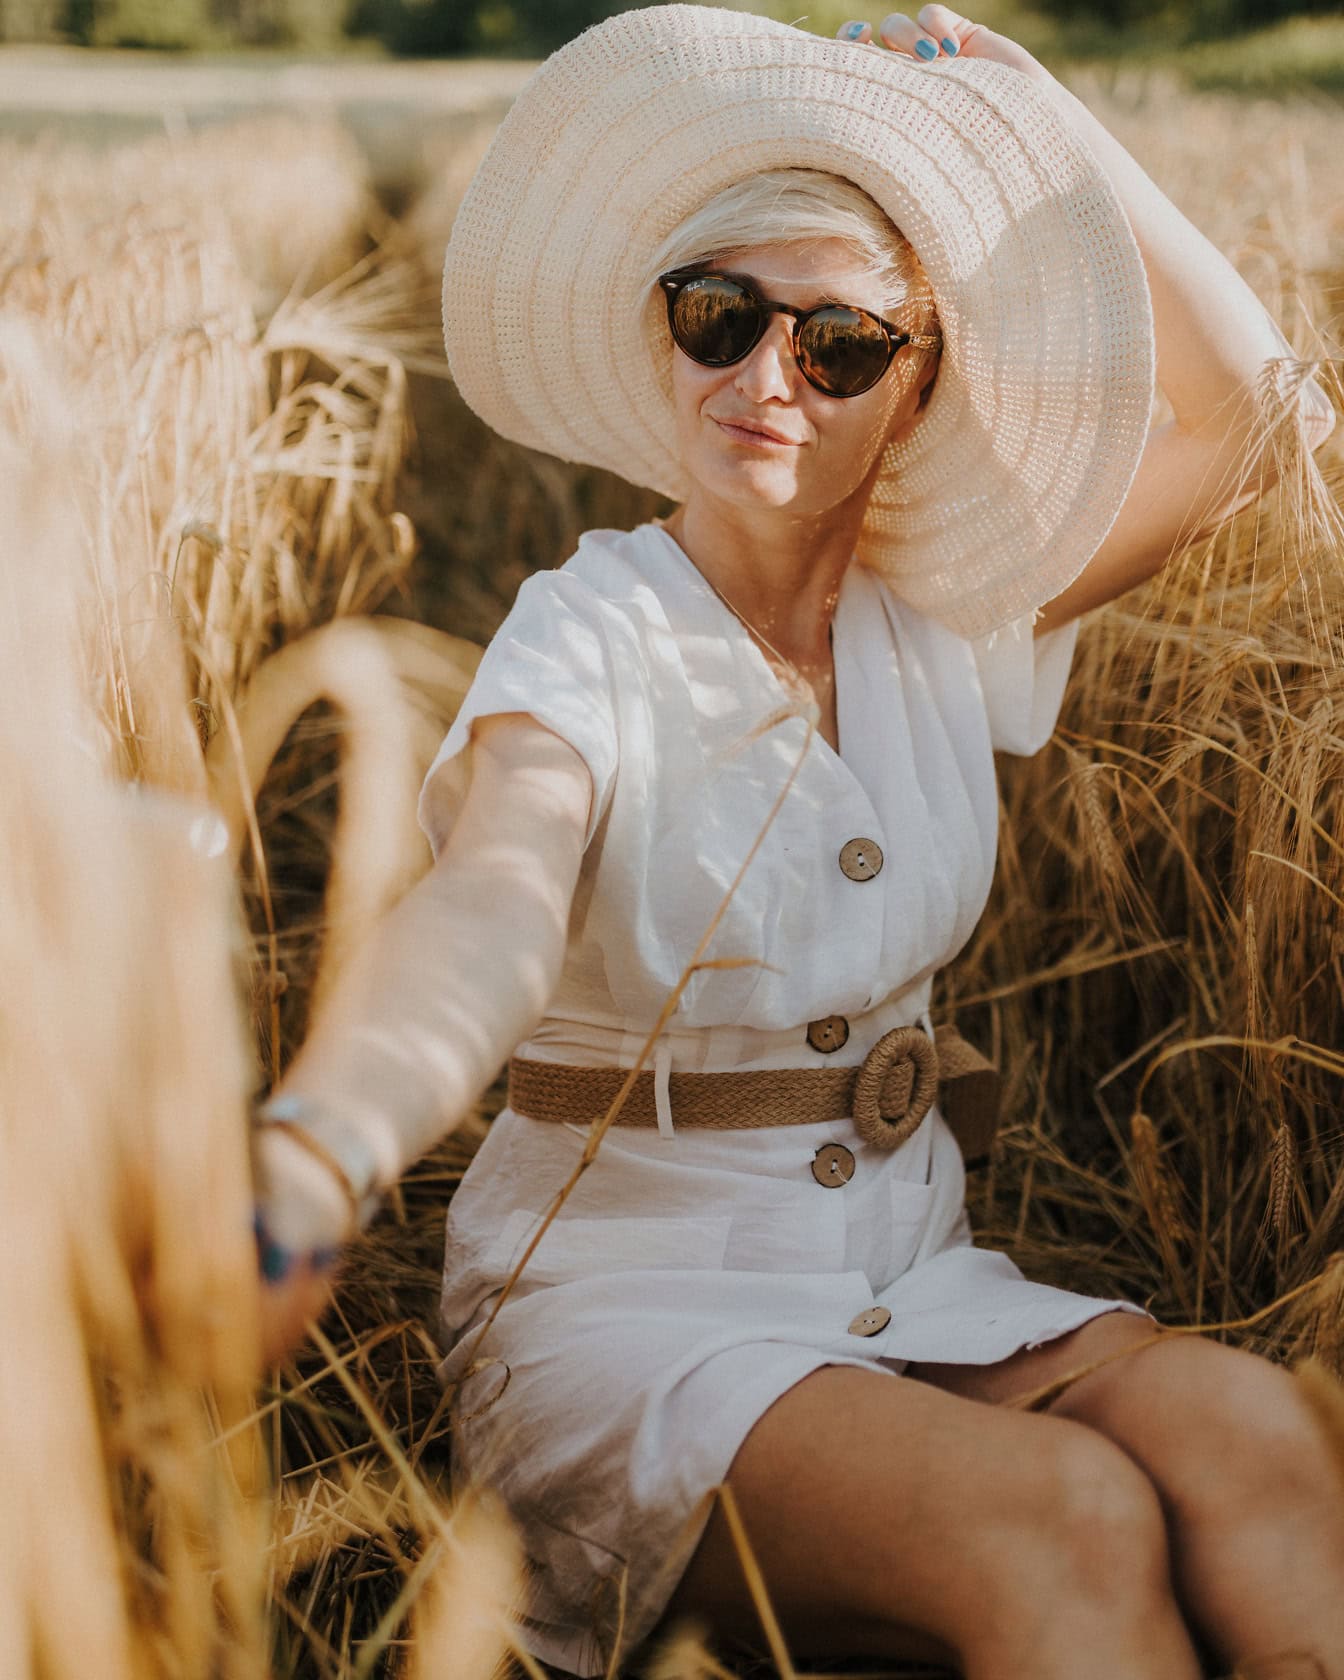 Pretty glamour blonde lady with hat and sunglasses sunbathes in a wheat field at the end of summer